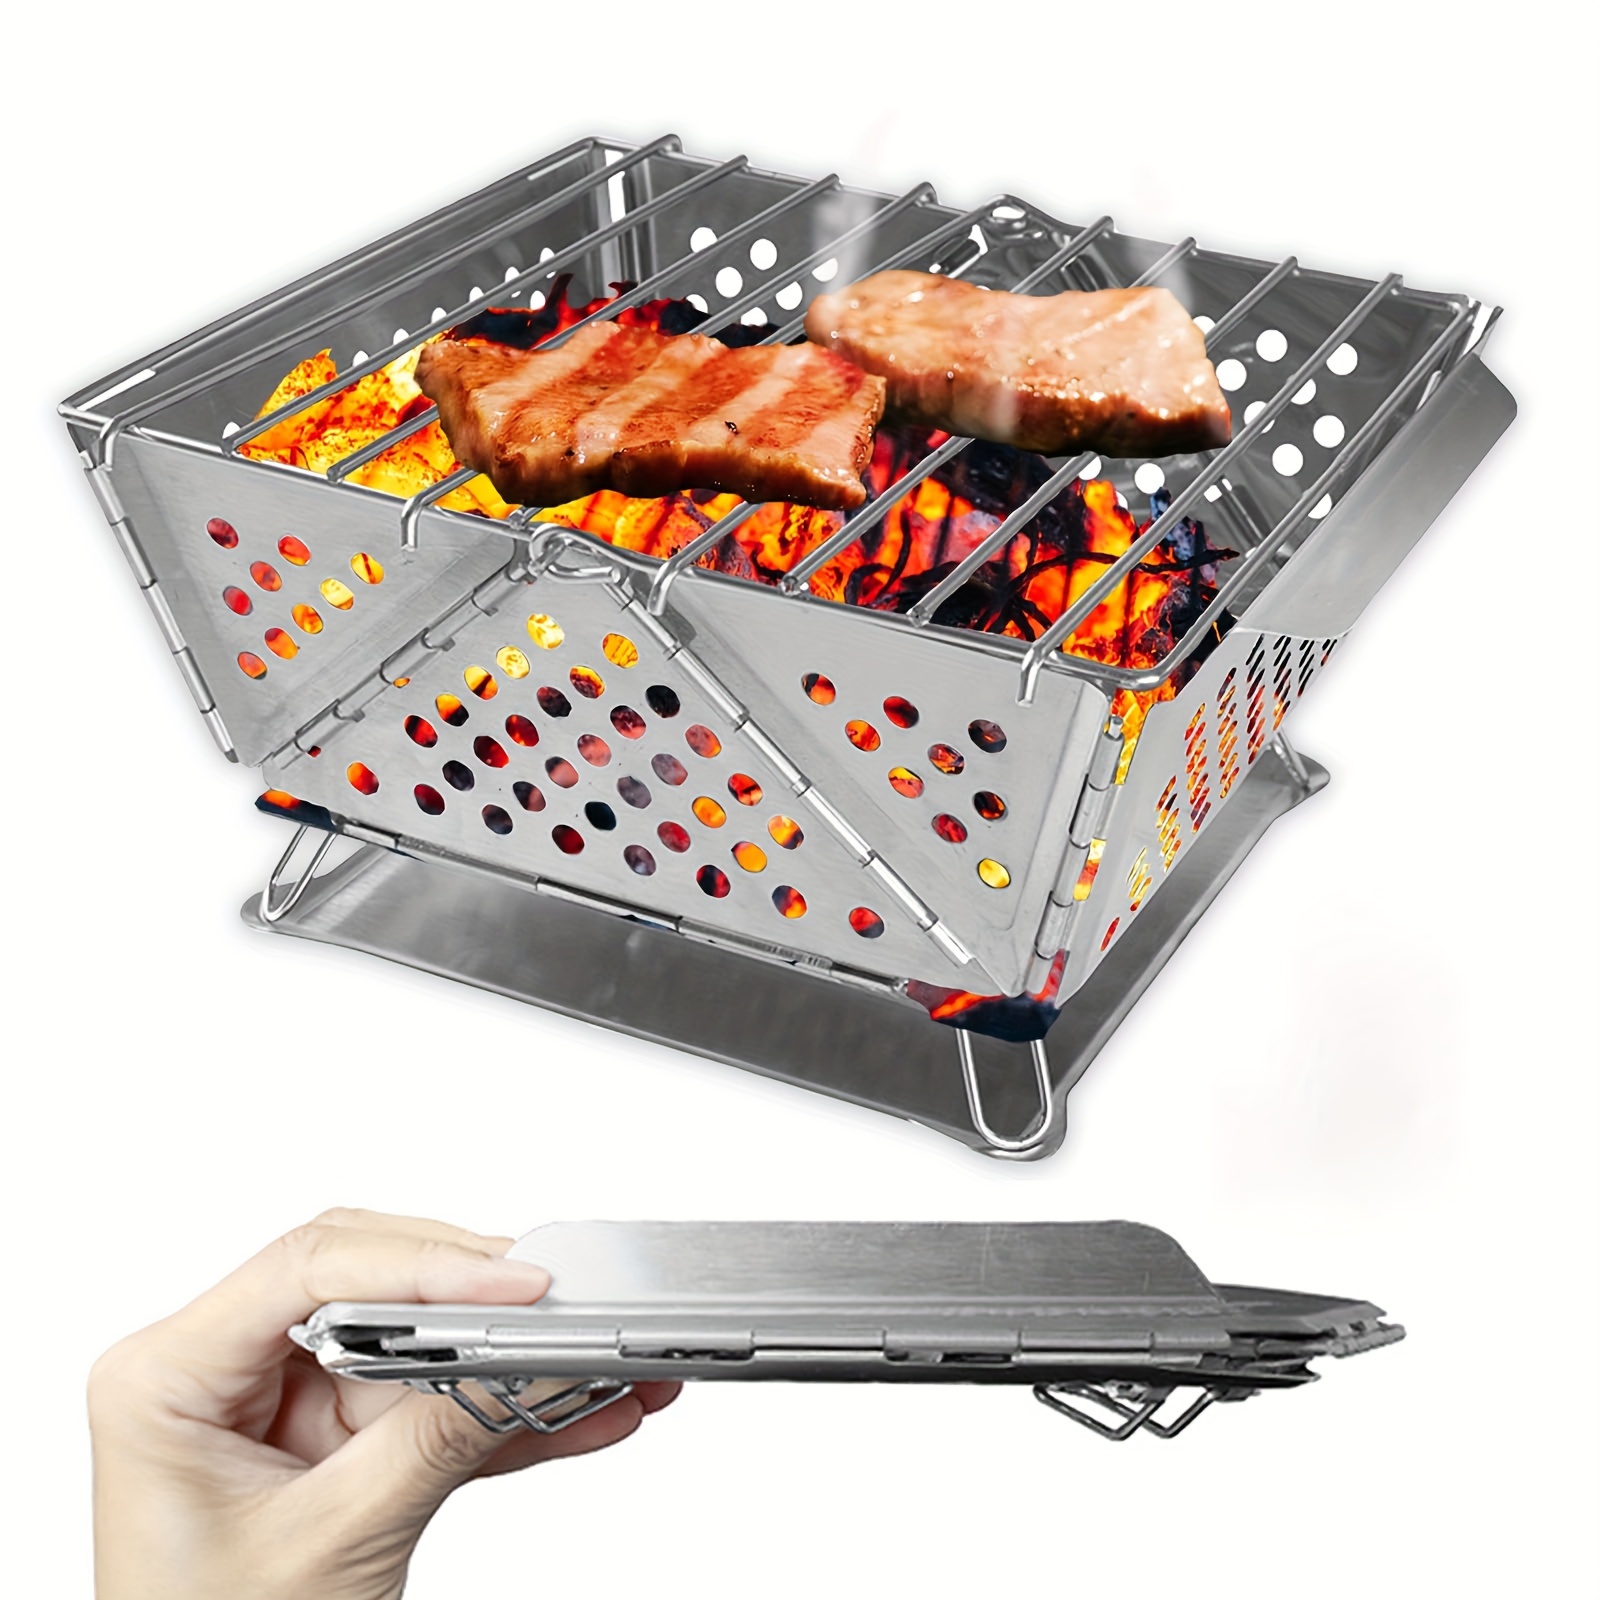 Grill accessories & Outdoor Cooking